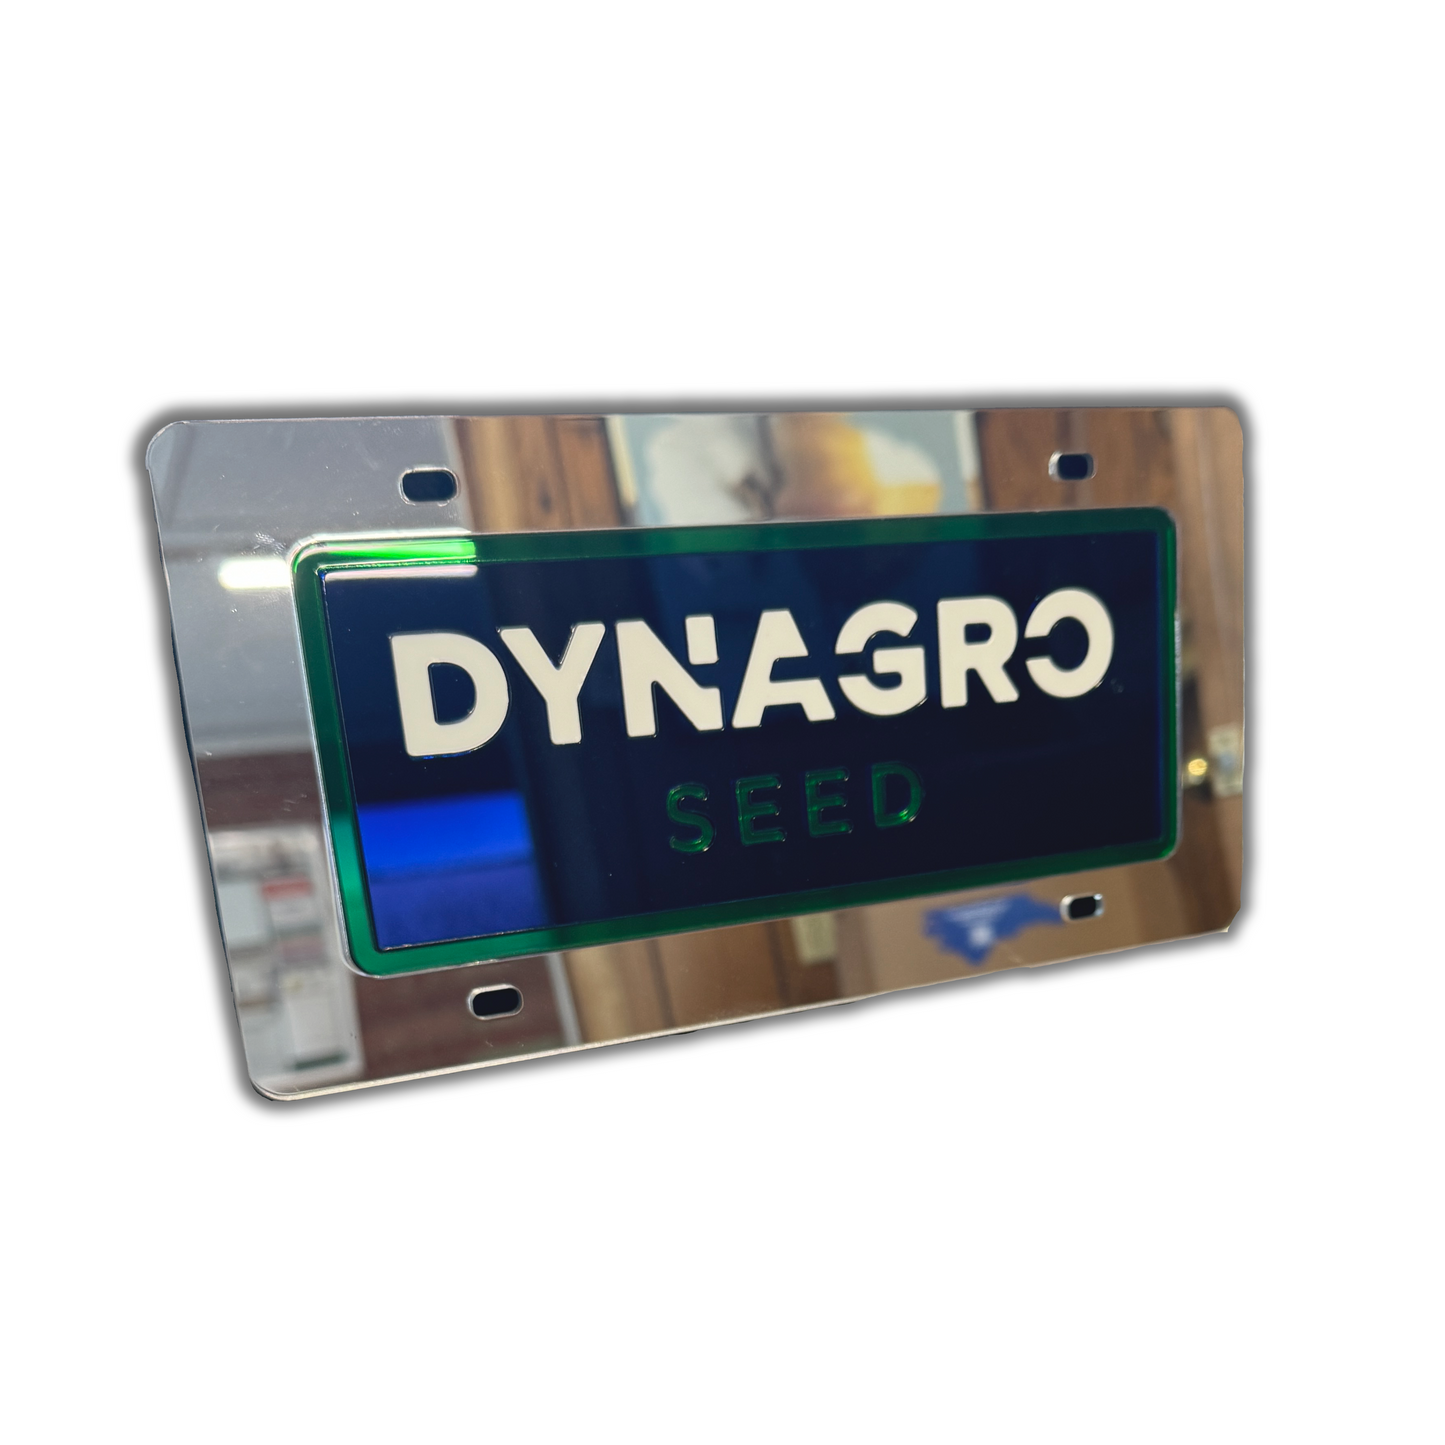 DYNA-GRO Seed License Plate (mirrored border)